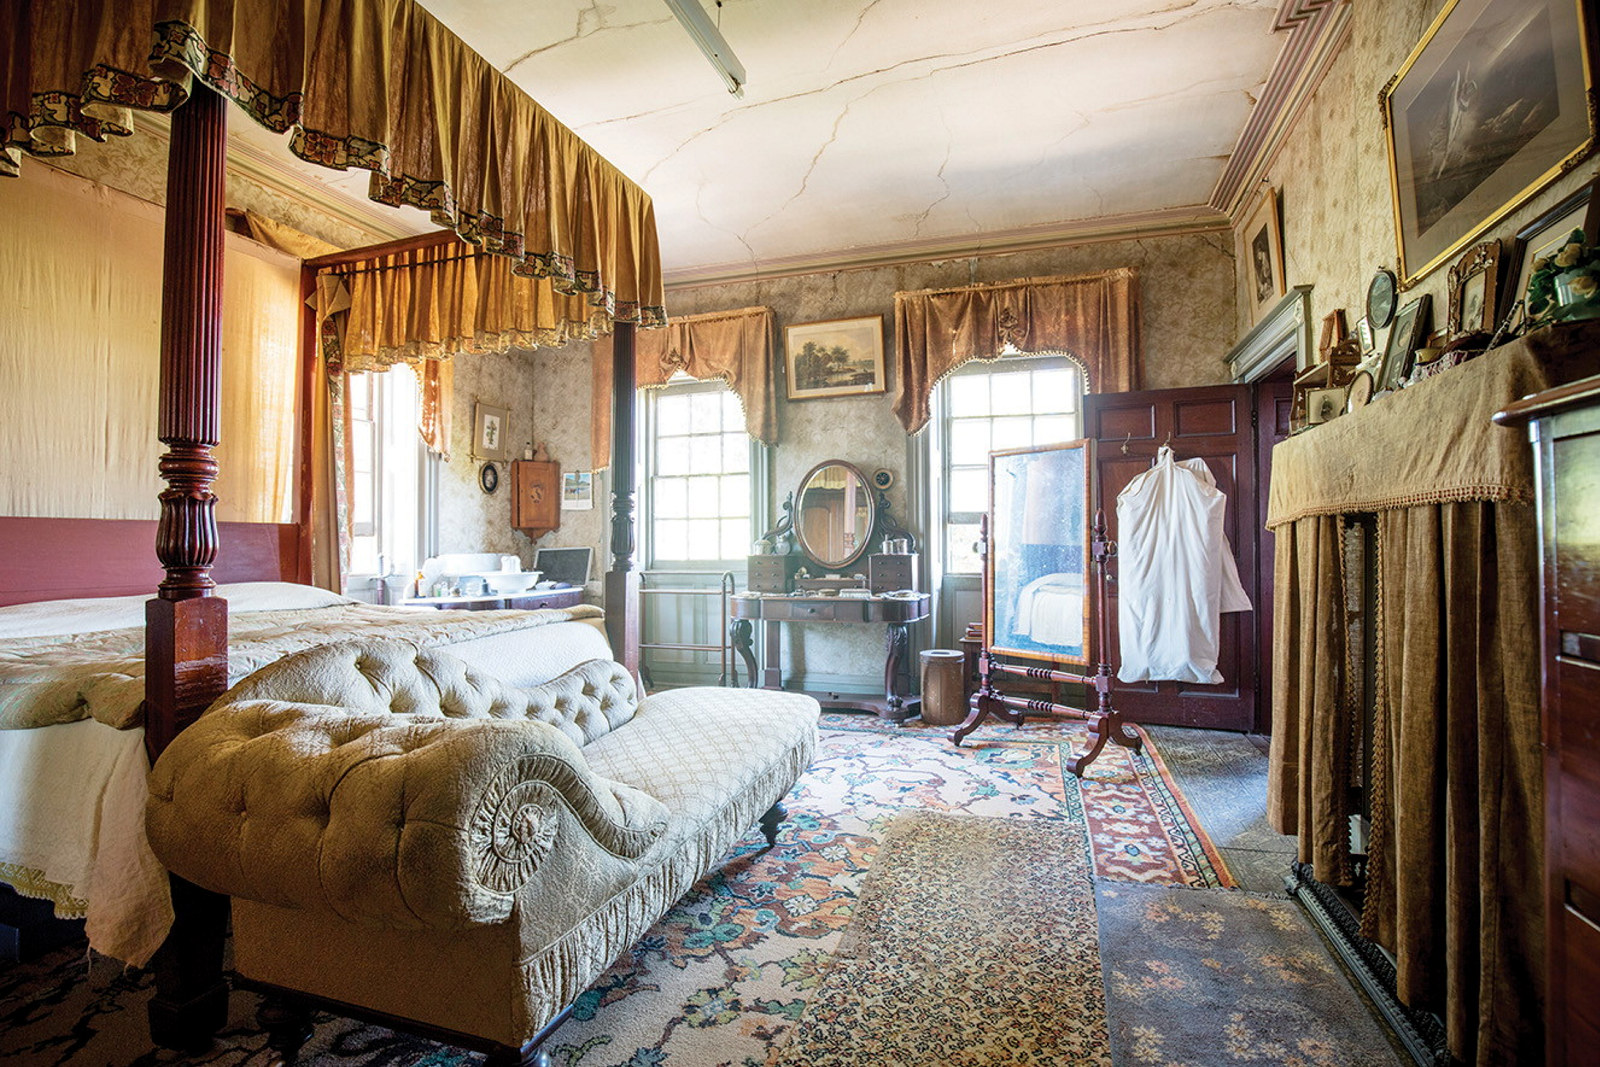 Ornately furnished bedroom with canopied bed and chaise longue to left and windows at rear.